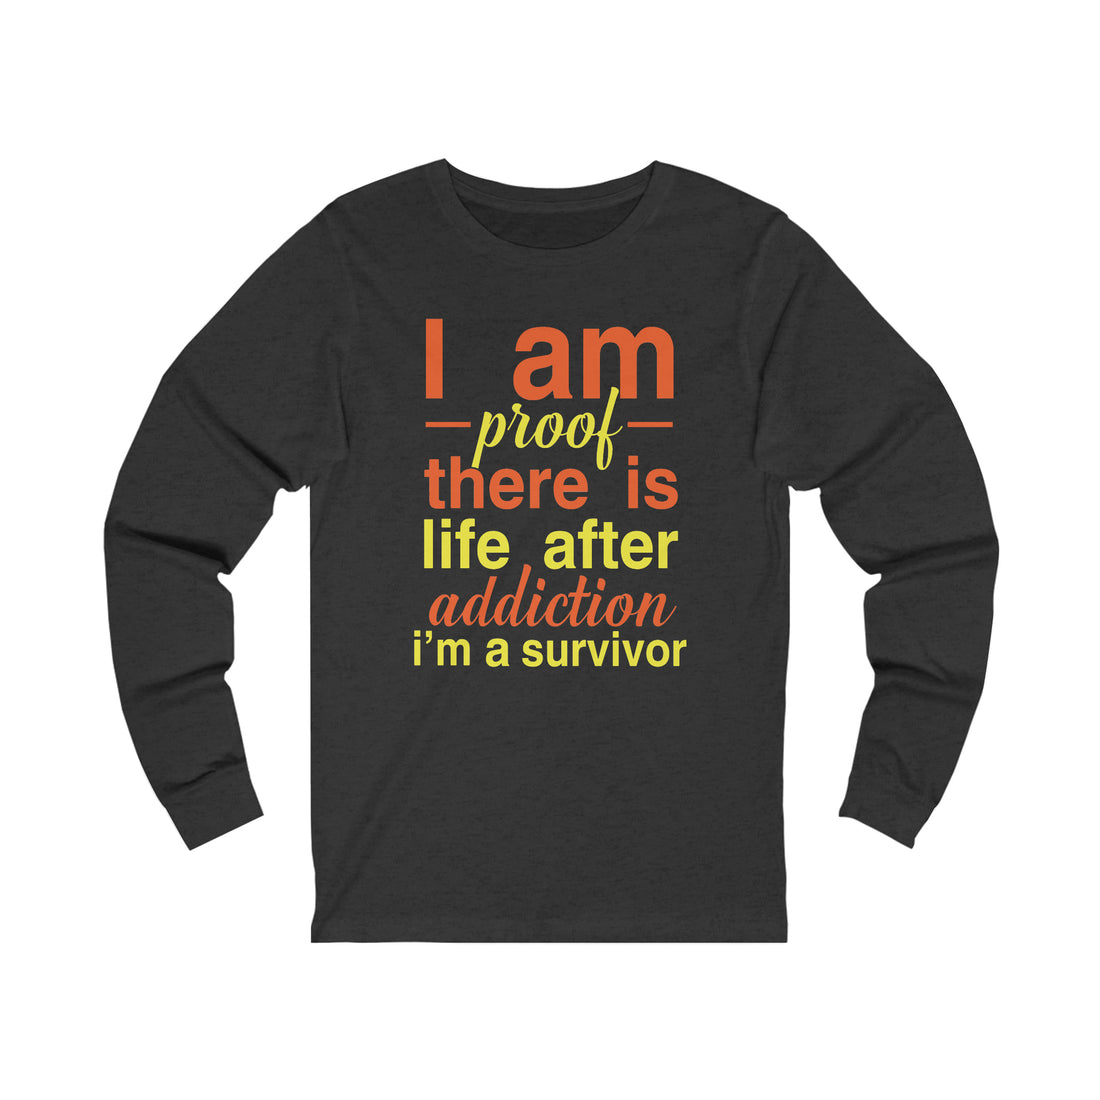 I Am Proof There Is Life After Addiction - Unisex Jersey Long Sleeve Tee